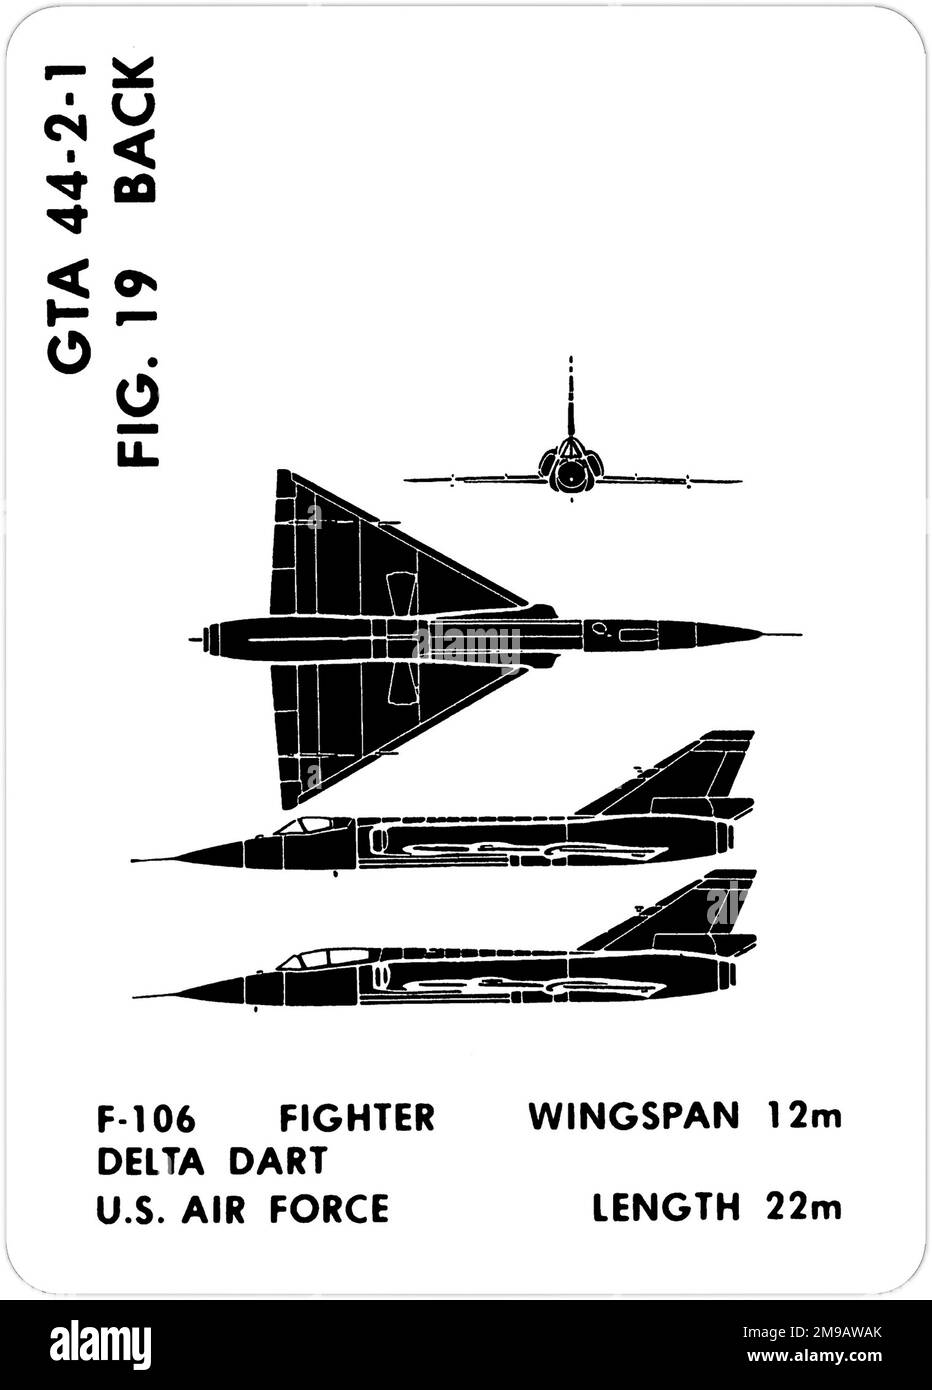 Convair F-106A - F-106B Delta Dart. This is one of the series of Graphics Training Aids (GTA) used by the United States Army to train their personnel to recognize friendly and hostile aircraft. This particular set, GTA 44-2-1, was issued in July1977. The set features aircraft from: Canada, Italy, United Kingdom, United States, and the USSR. Stock Photo